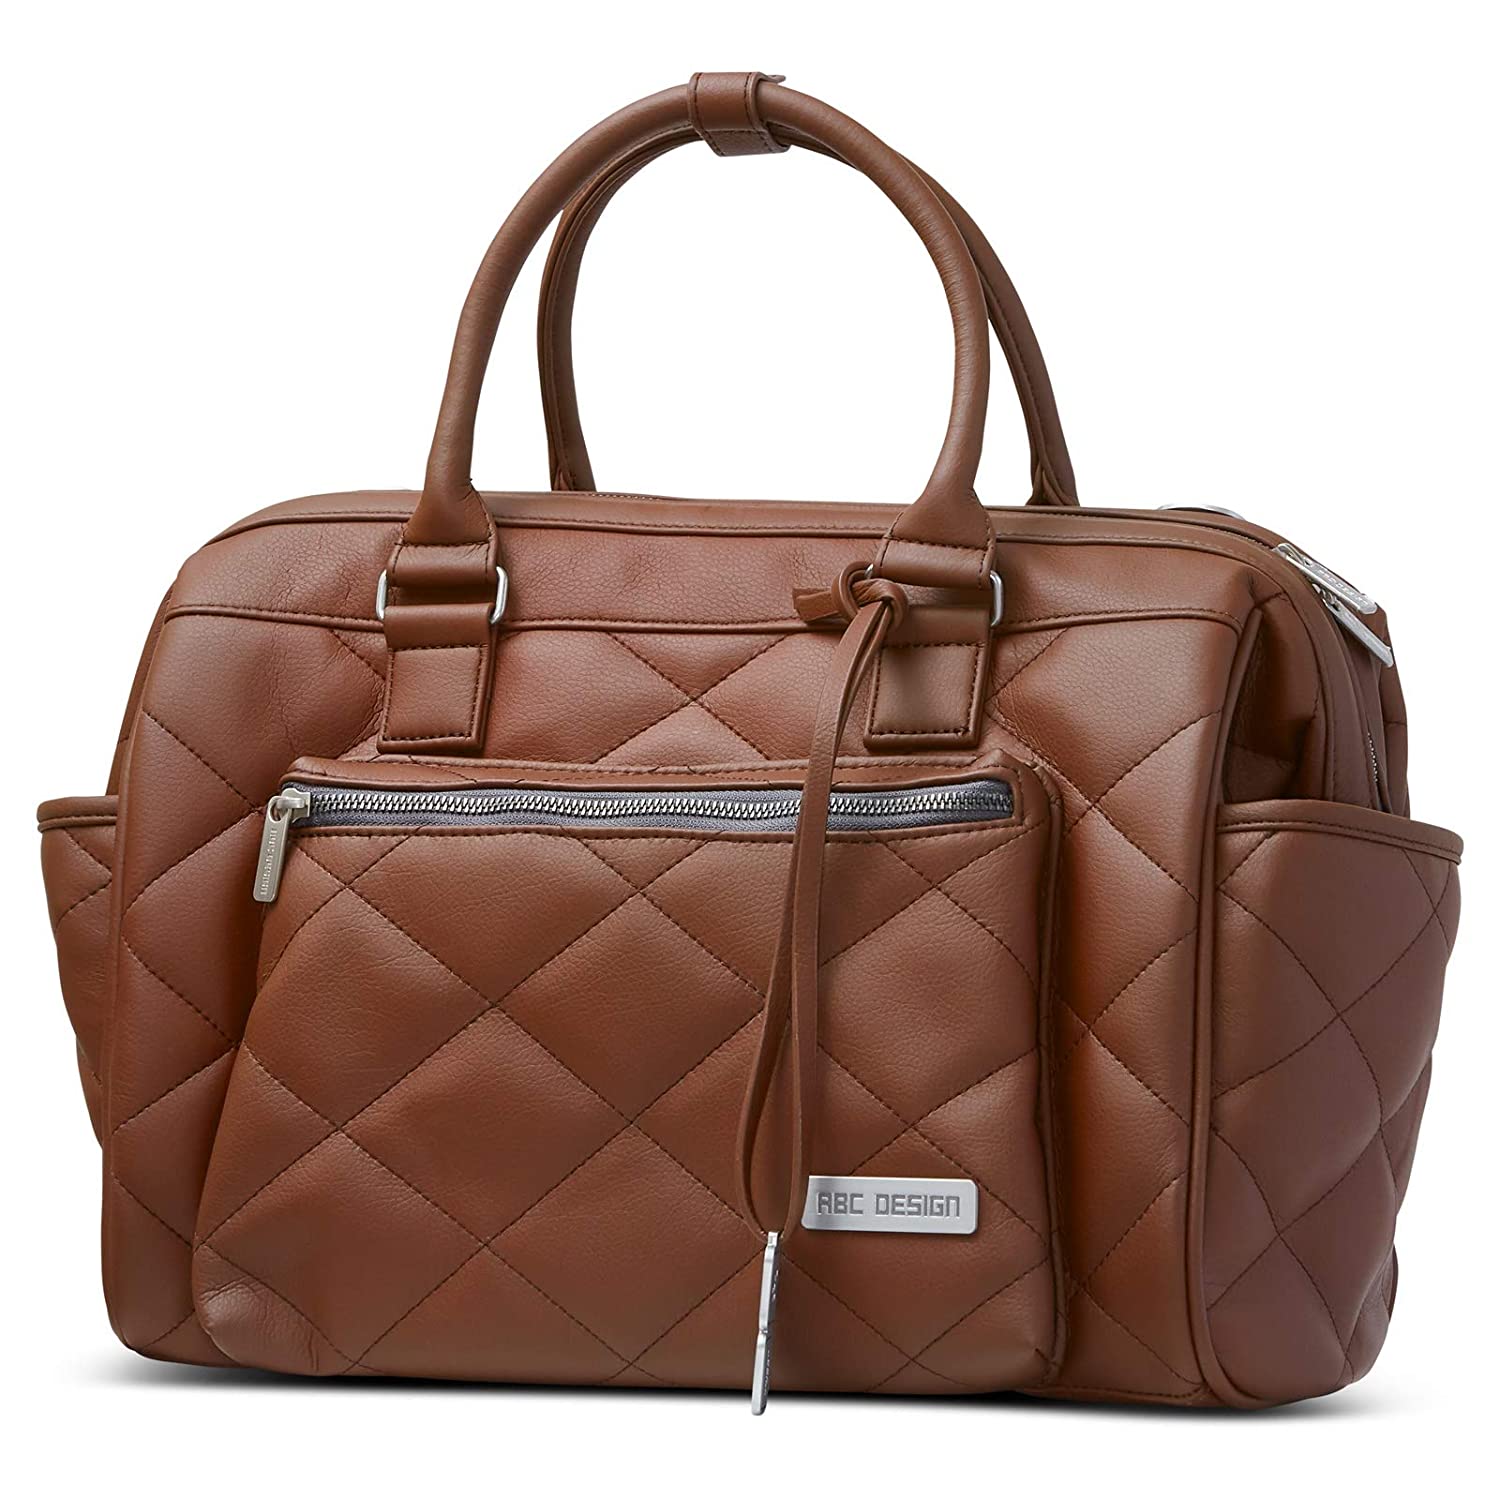 ABC Design 2020 Changing Bag Style Brown